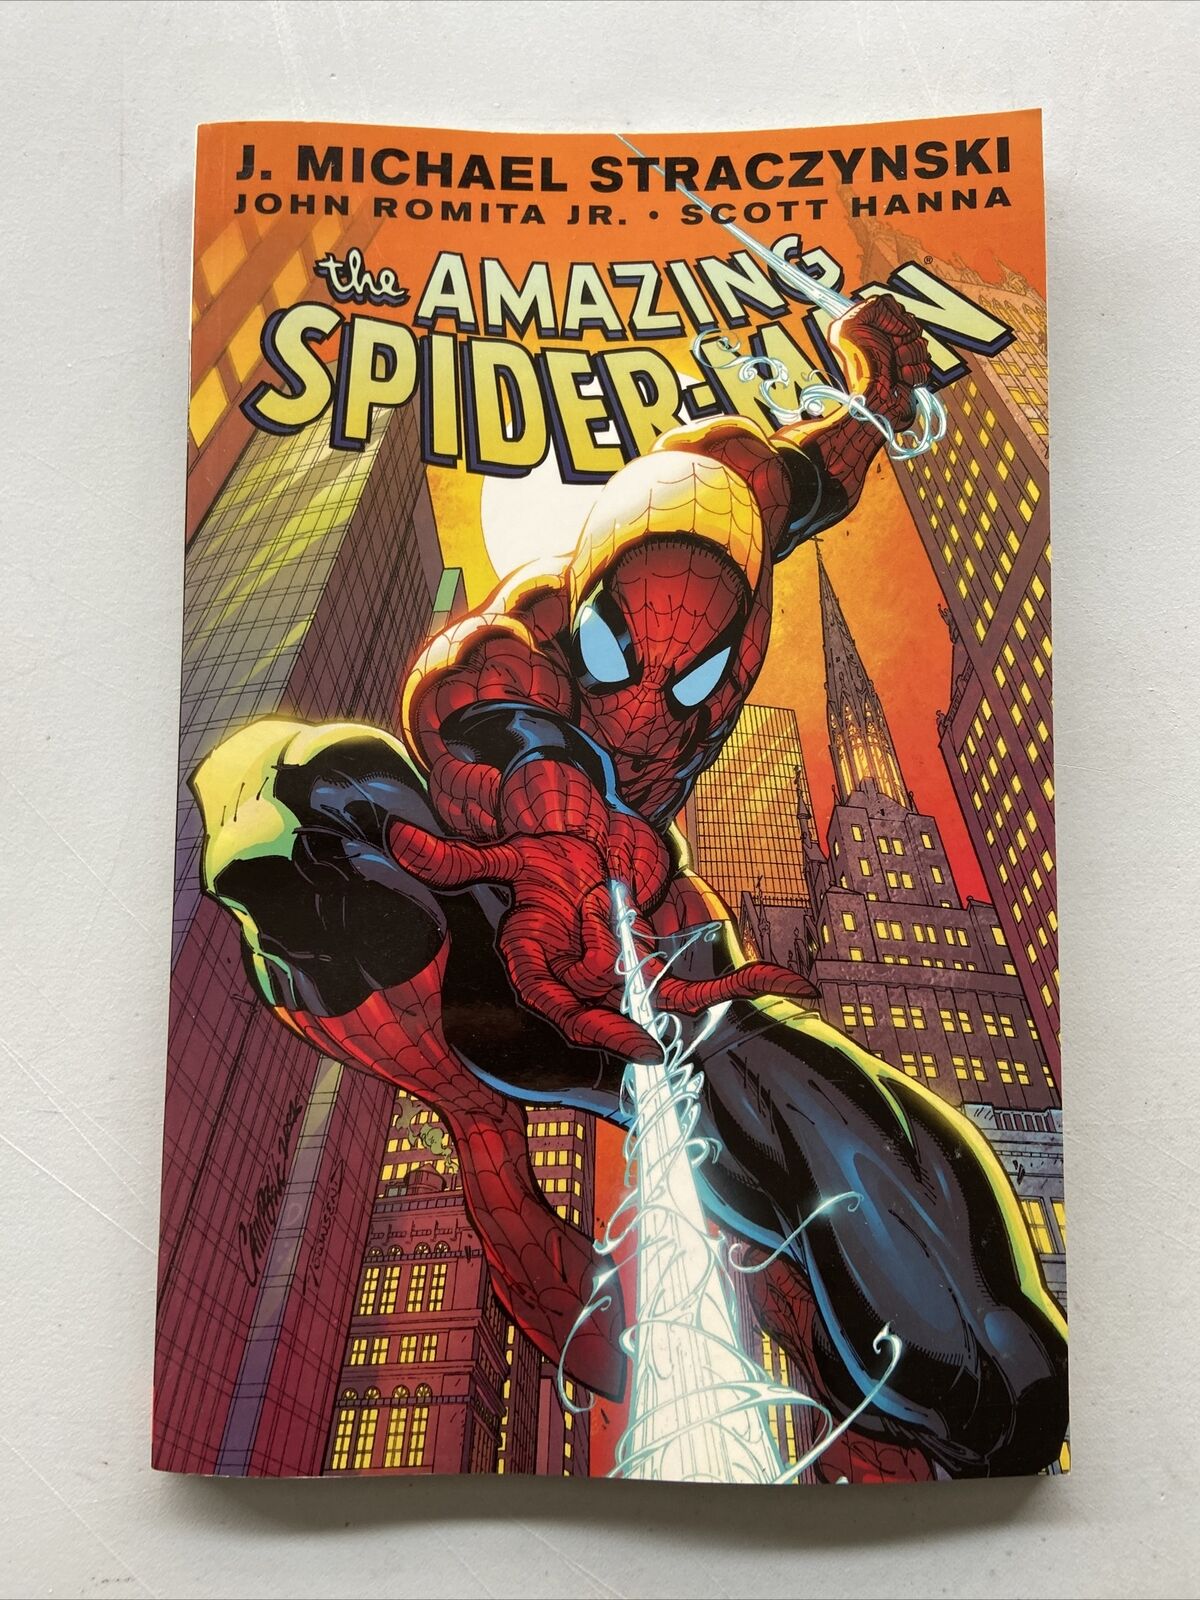 AMAZING SPIDER-MAN VOL 4 THE LIFE AND DEATH OF SPIDERS (2006) ISSUES V2 46-50